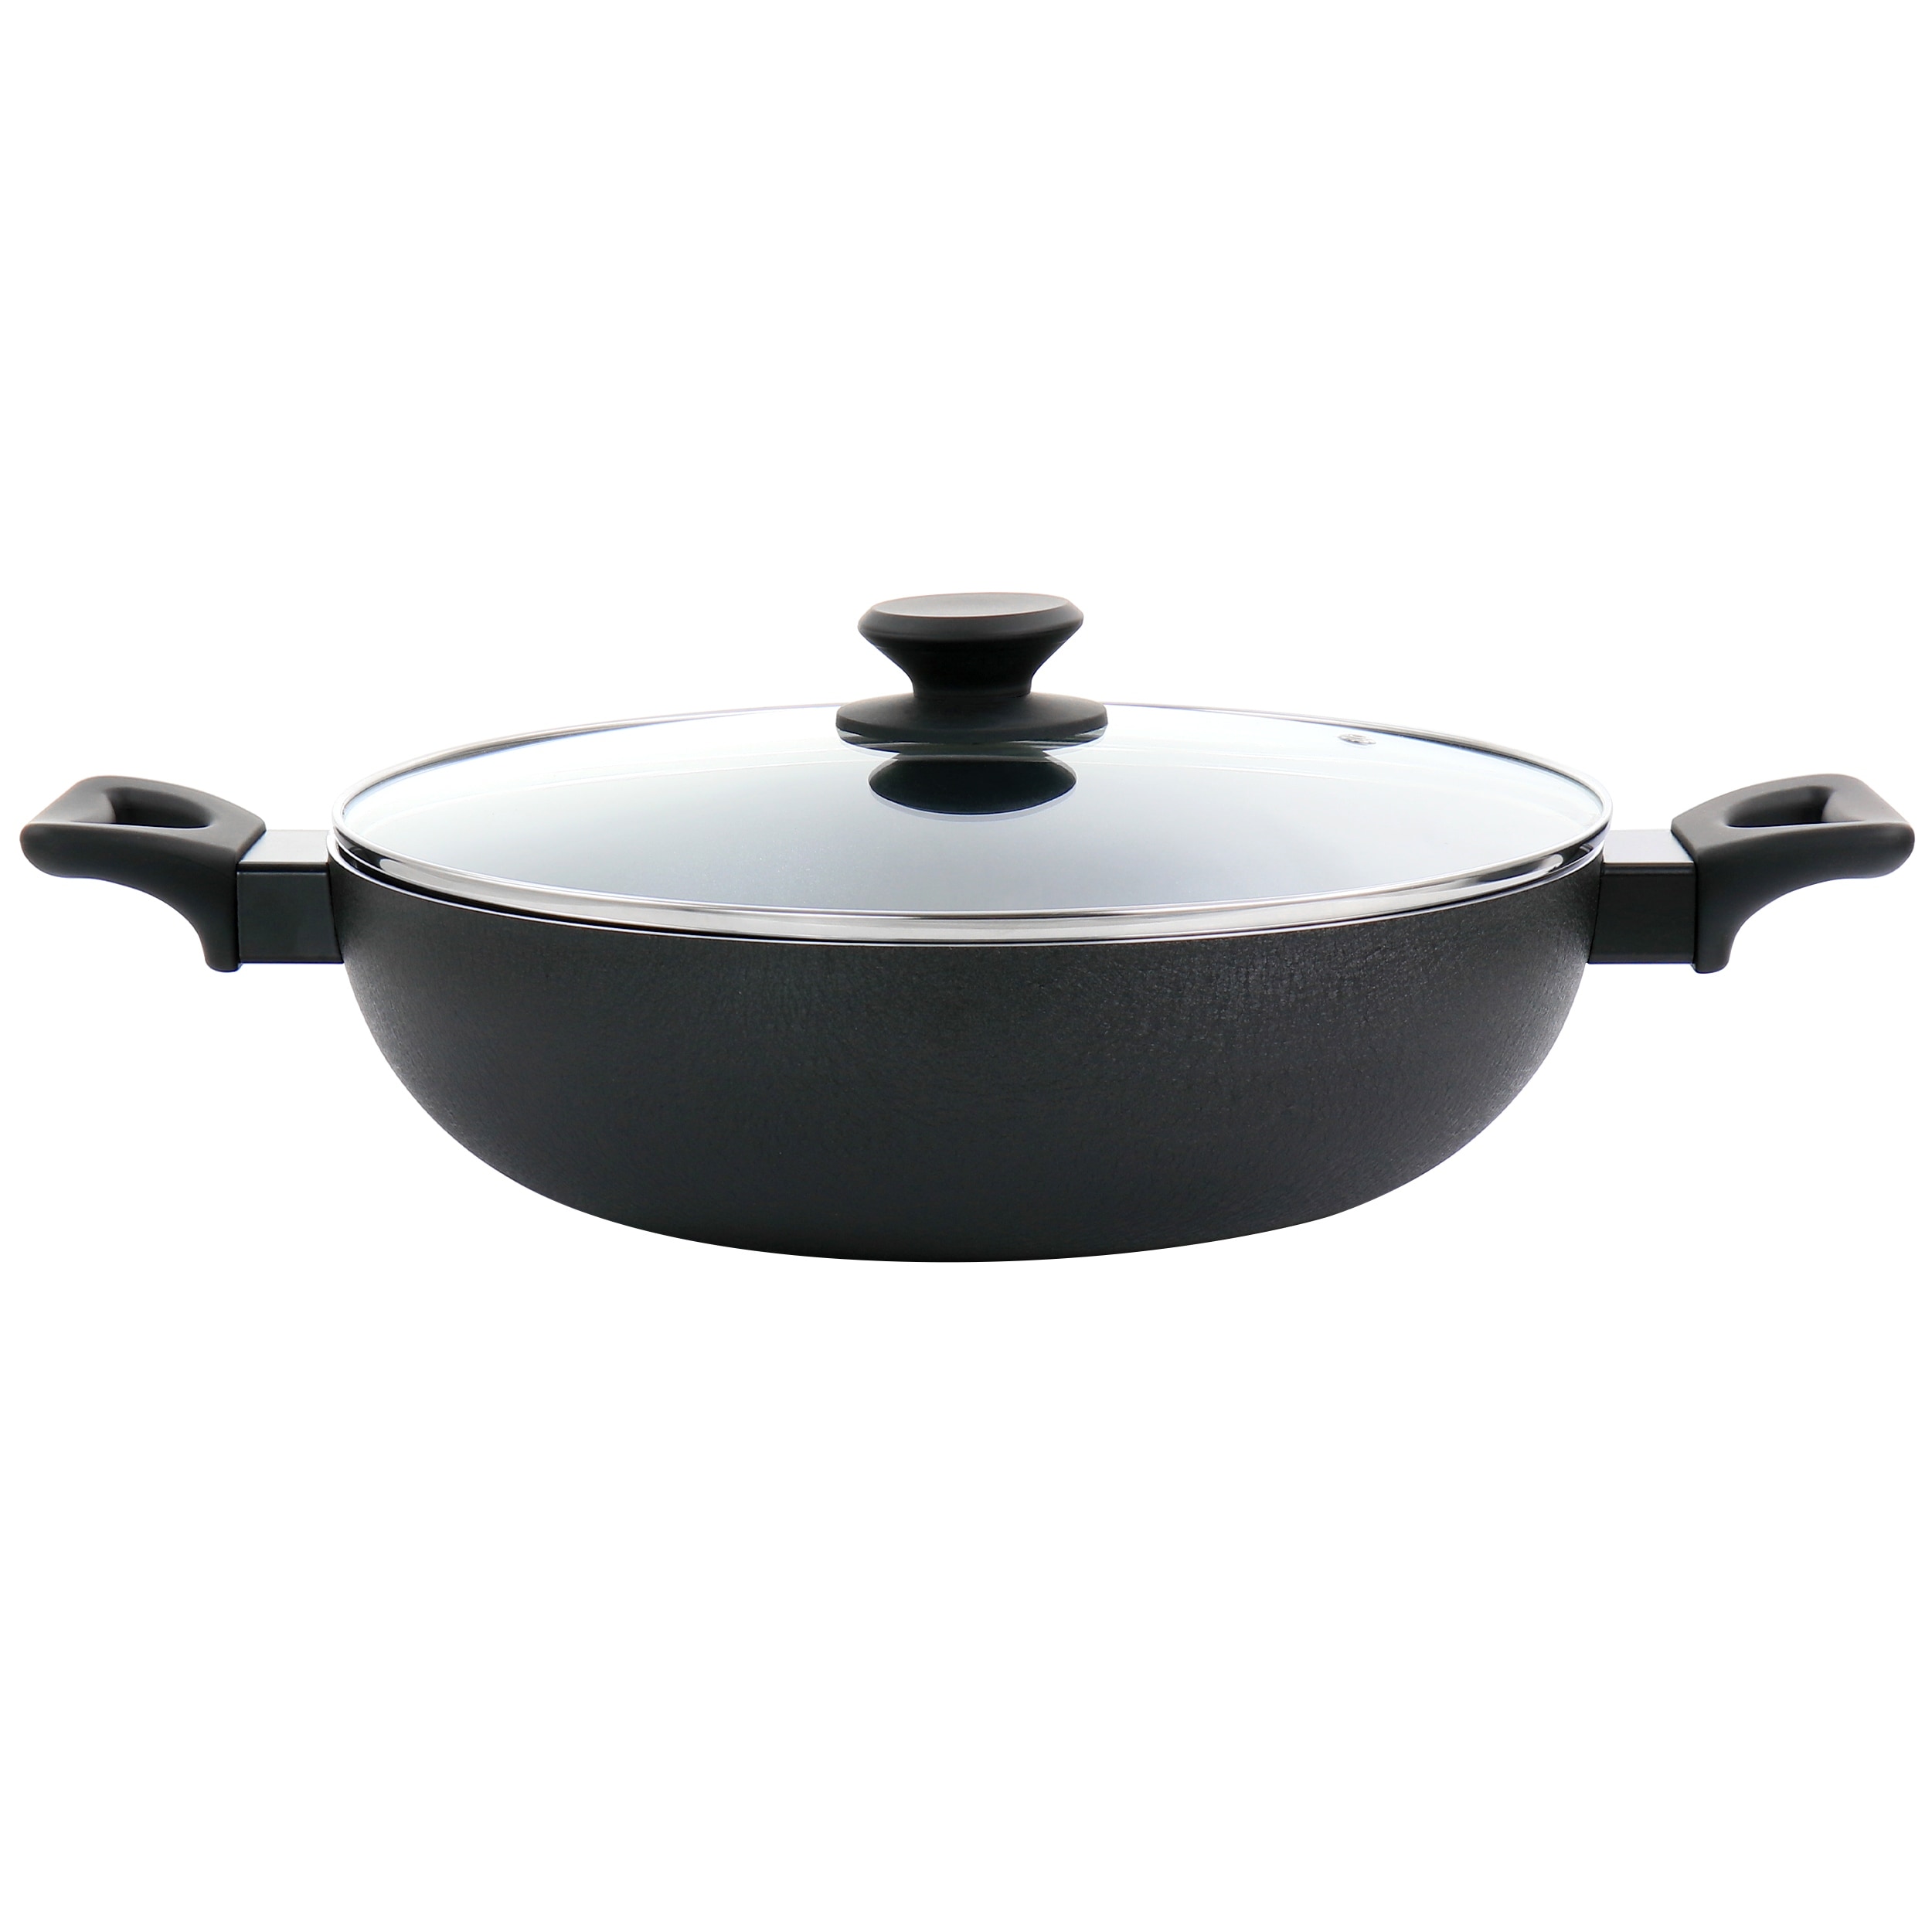 https://ak1.ostkcdn.com/images/products/is/images/direct/e9e41b9159f76b74e550d4e91e9a65c092a99ef2/5-Quart-Nonstick-Aluminum-Everyday-Pan-in-Black.jpg